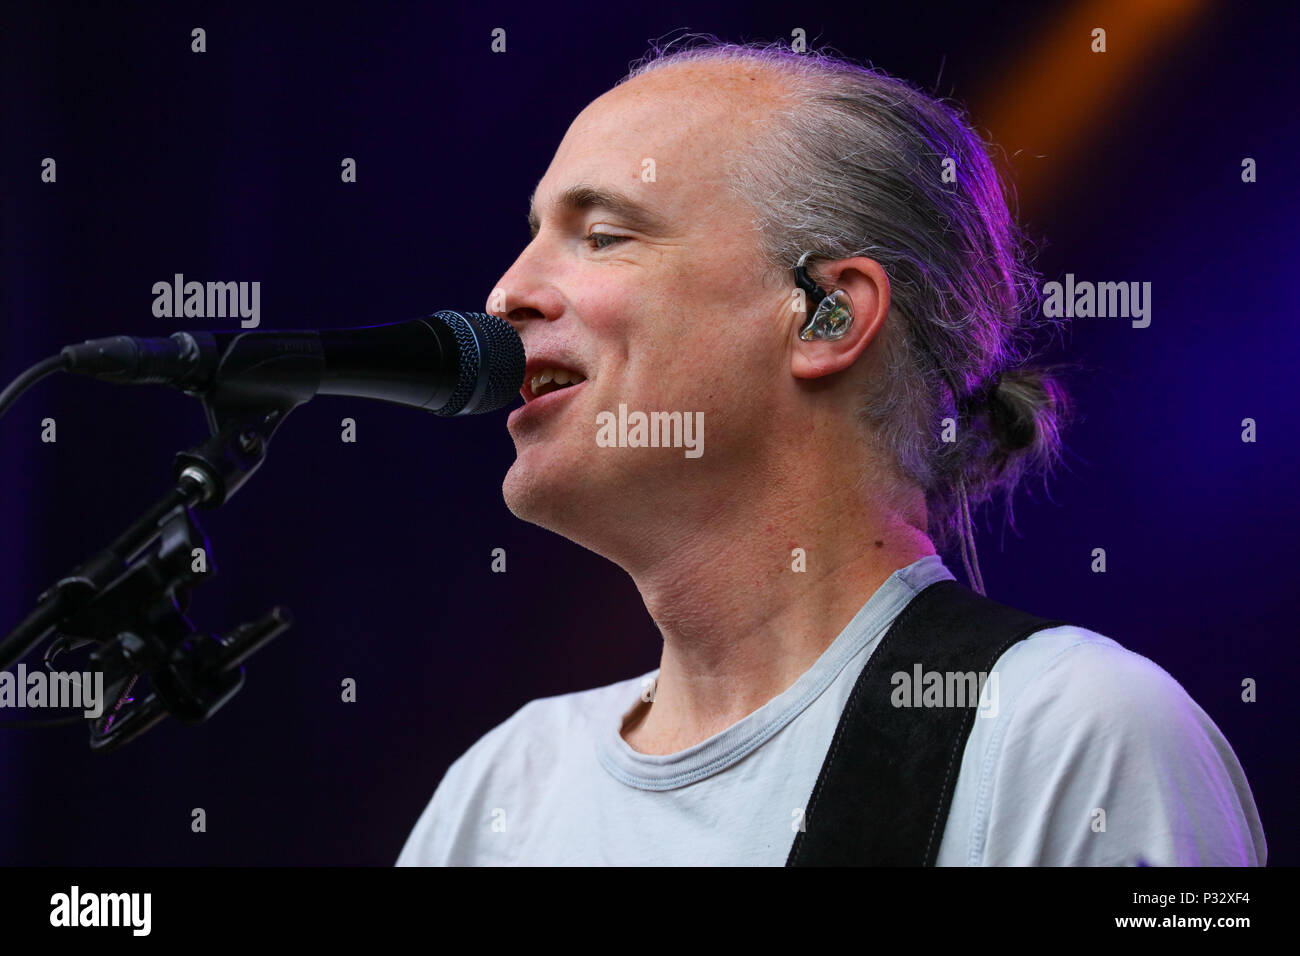 Norway, Oslo - June 17, 2018. The Scottish rock band Travis performs a live concert during the Norwegian music festival Piknik i Parken 2018 in Oslo. Here singer Fran Healy is seen live on stage. (Photo credit: Gonzales Photo - Stian S. Moller). Stock Photo